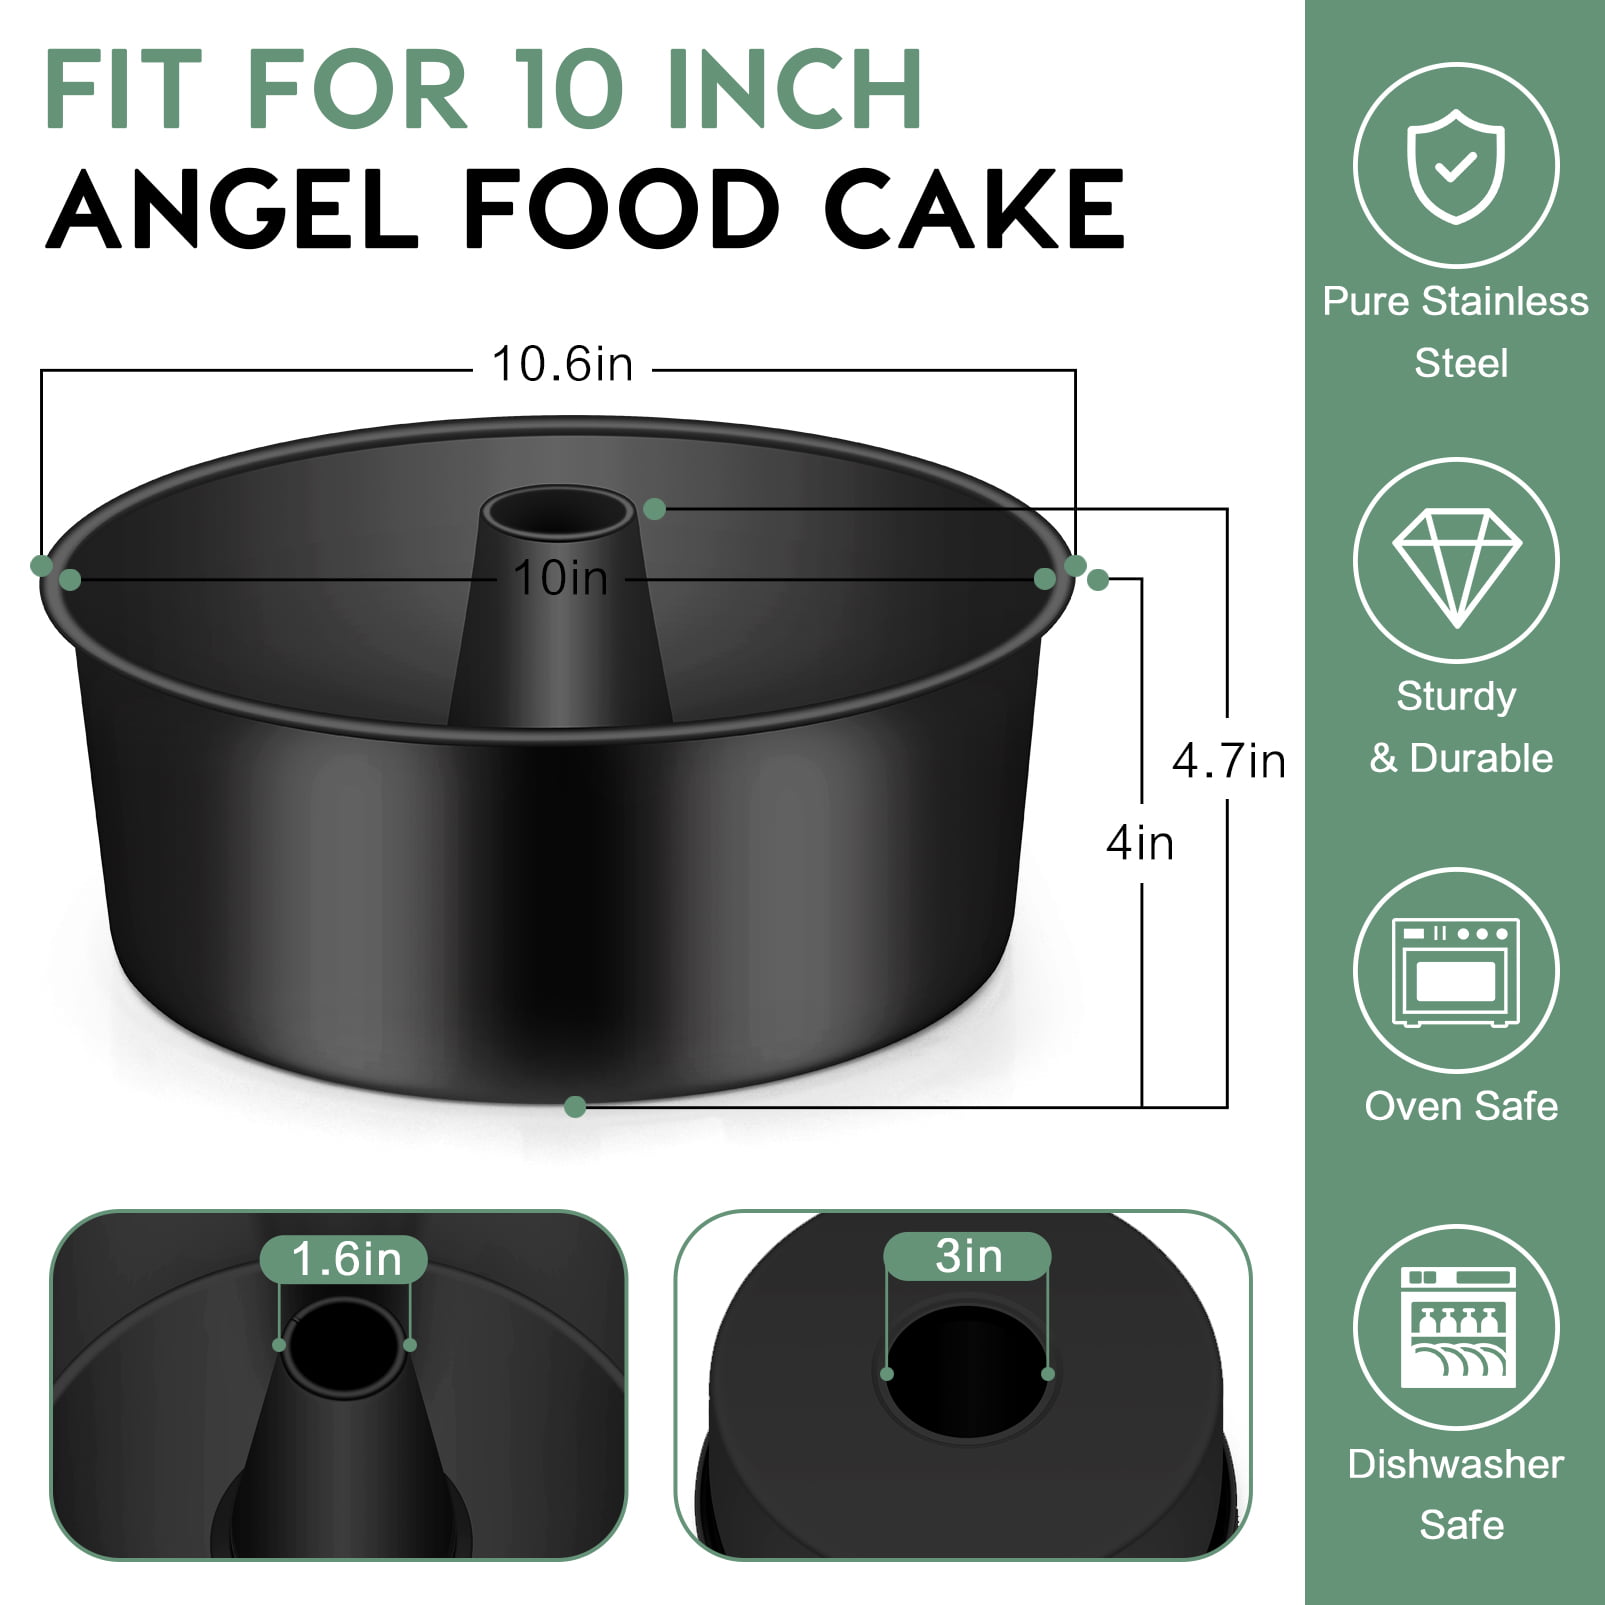 Coliware 10 inch Angel Food Cake Pan, Stainless Steel Non-toxic Pound Cake  Pan Mold with Tube - Silver 